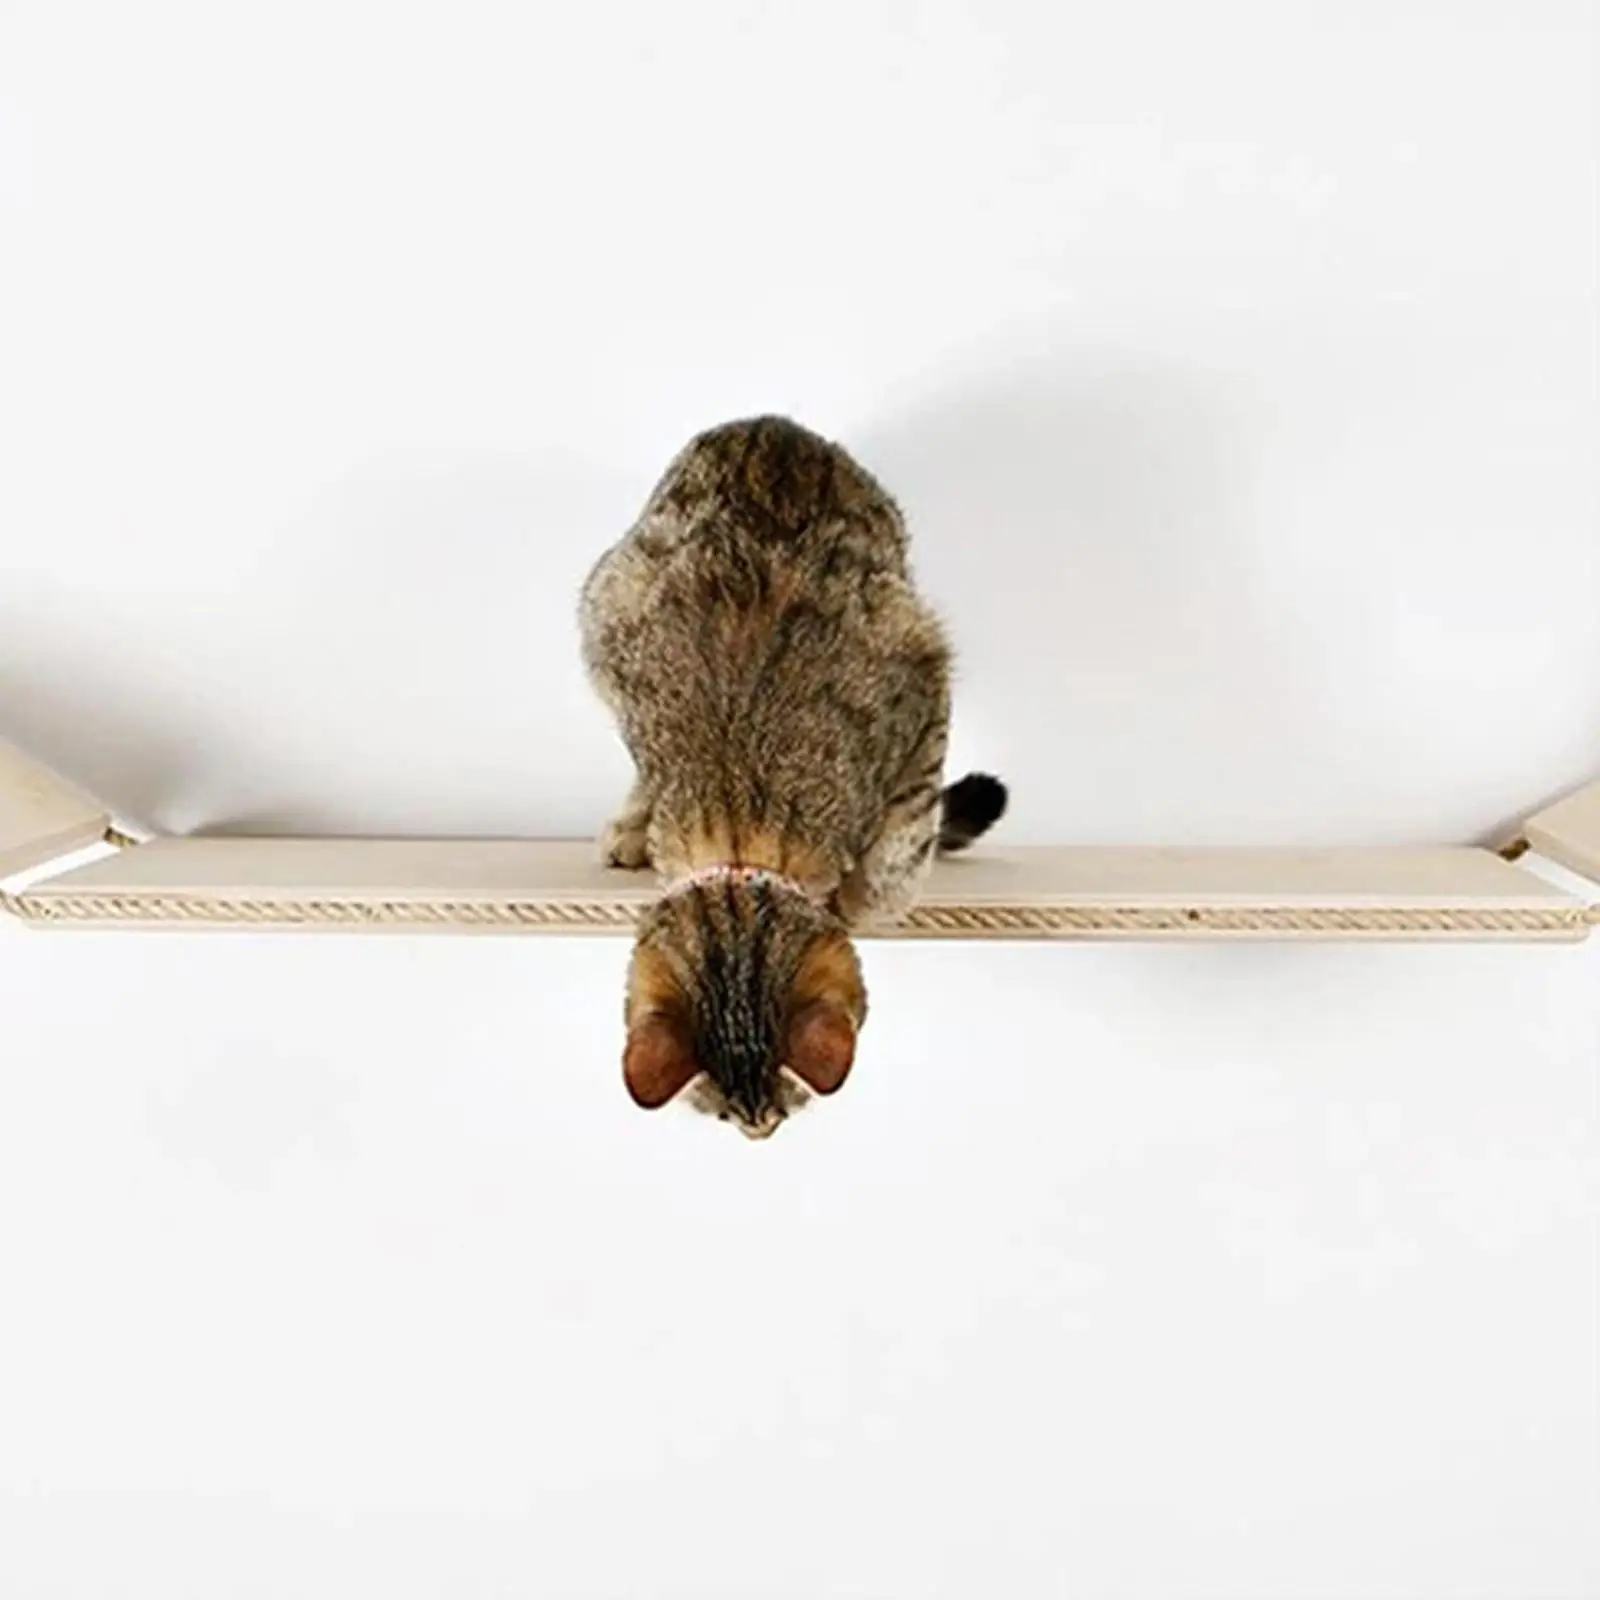 Wall Mounted Cat Hammock DIY Wall Shelf Perches wood Climbing Step Bridges for Large Cats Pet Cats Indoor Cats Playing